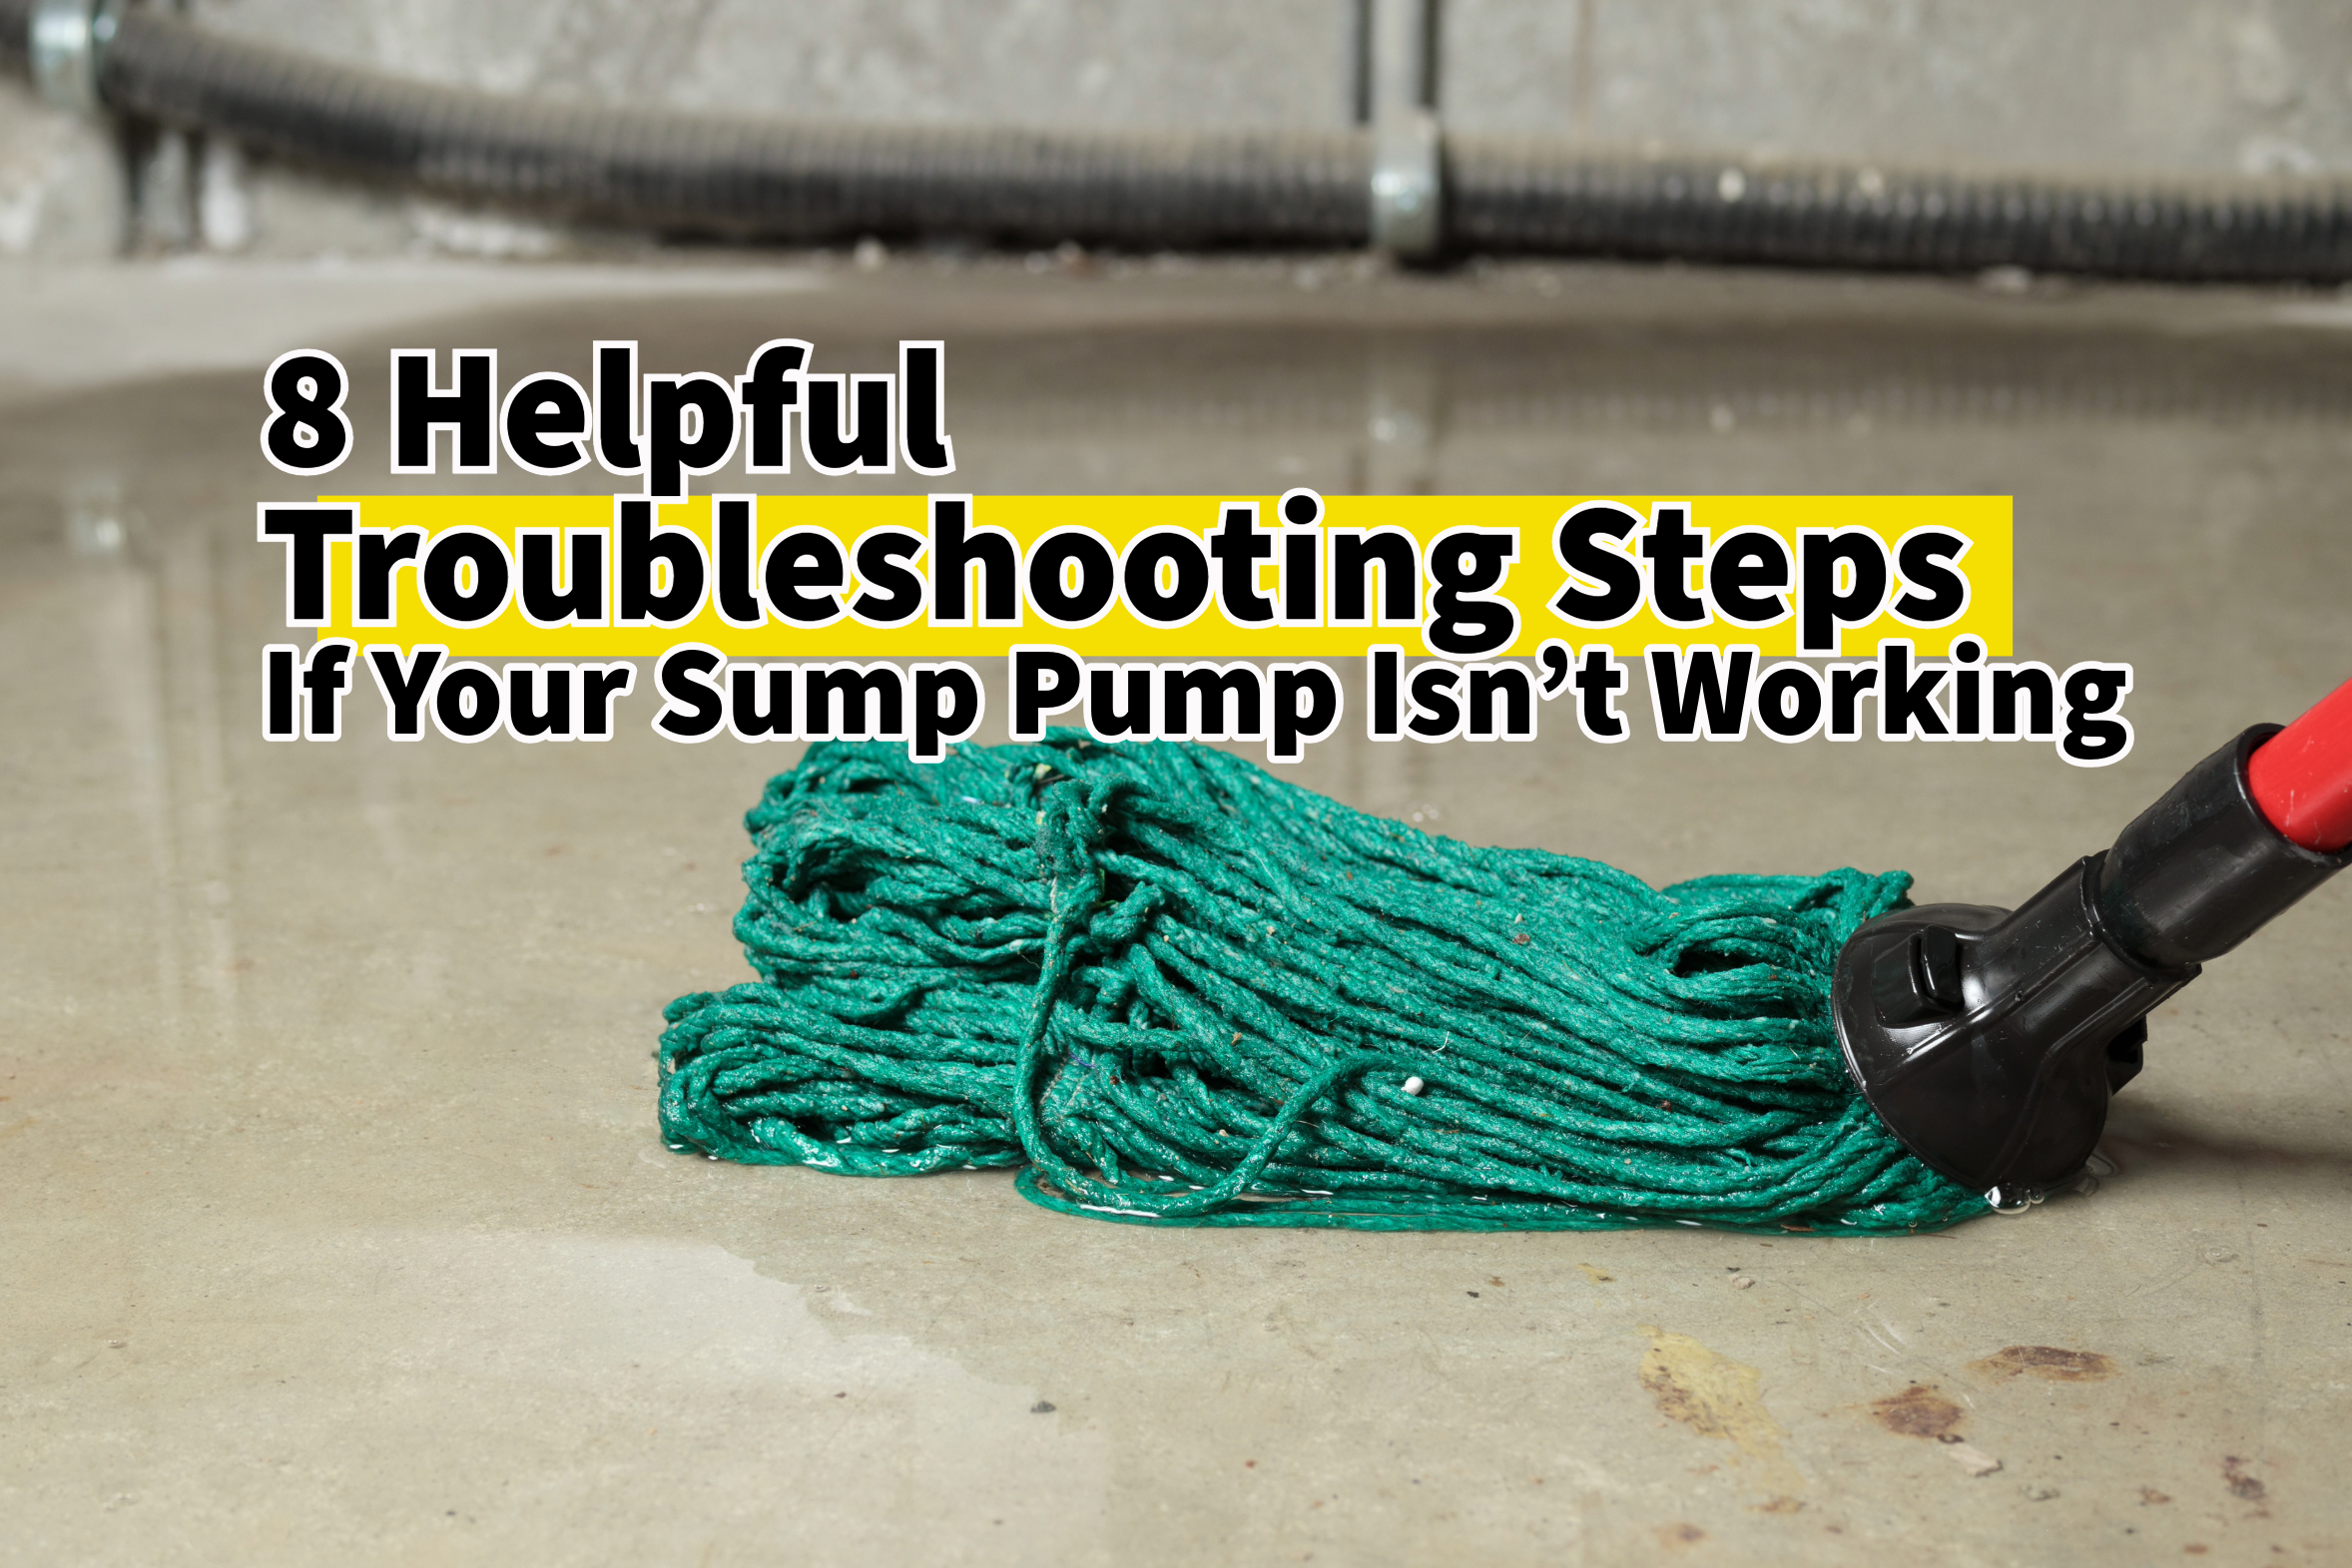 A homeowner’s guide to troubleshooting a malfunctioning sump pump. Plumbing and drain services in Gahanna, Ohio.